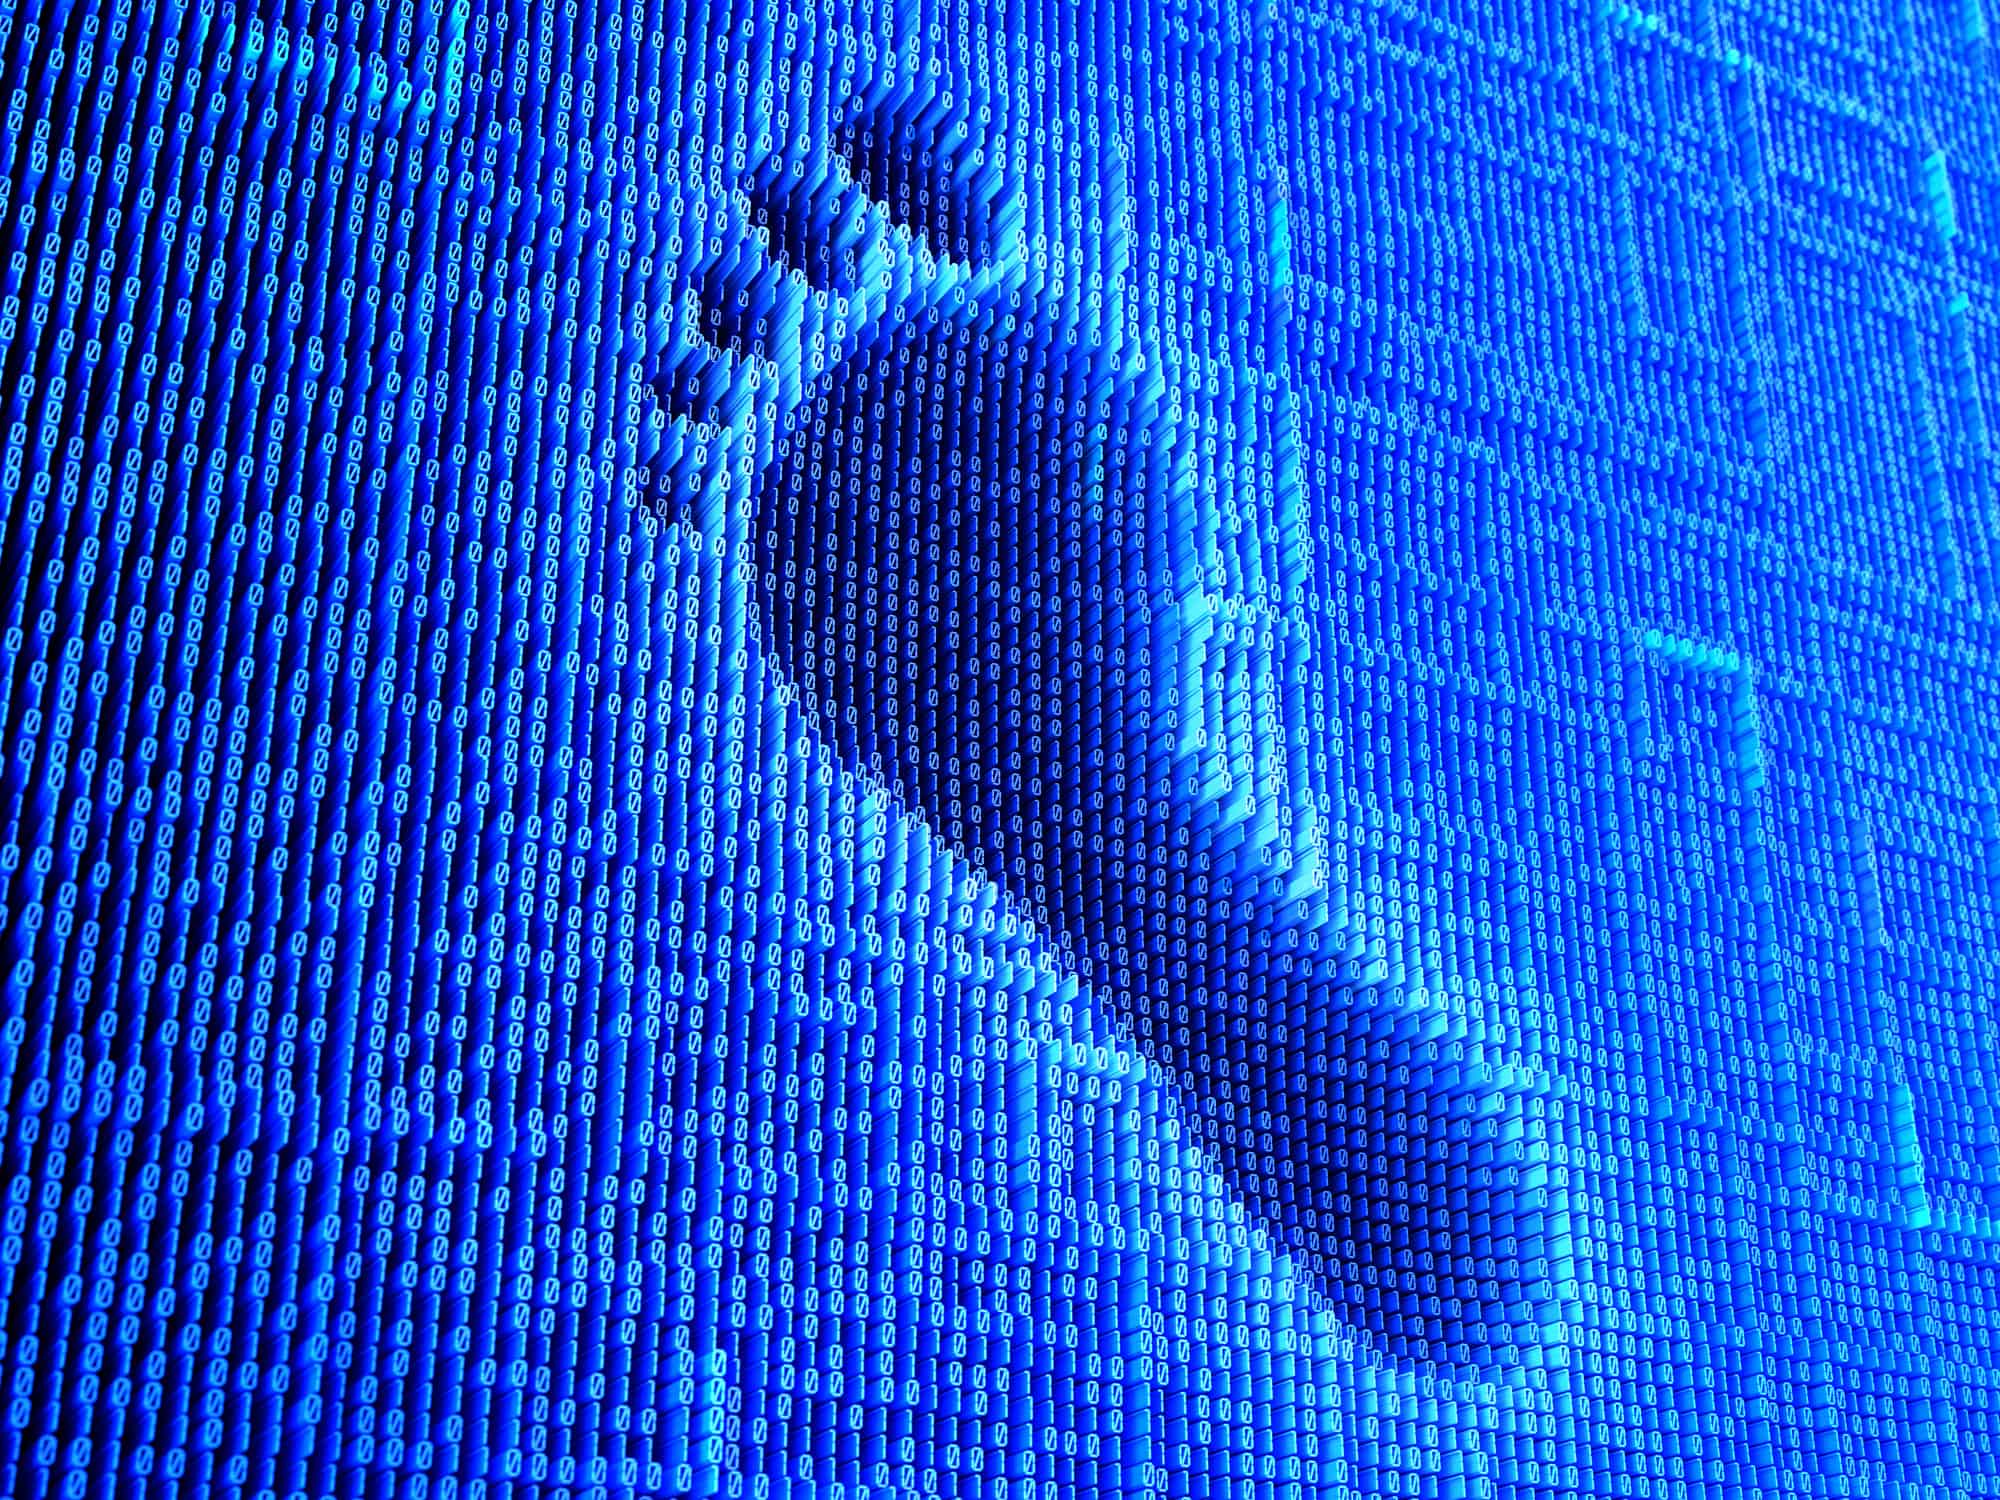 footprint showing data quality issues being stopped in their tracks